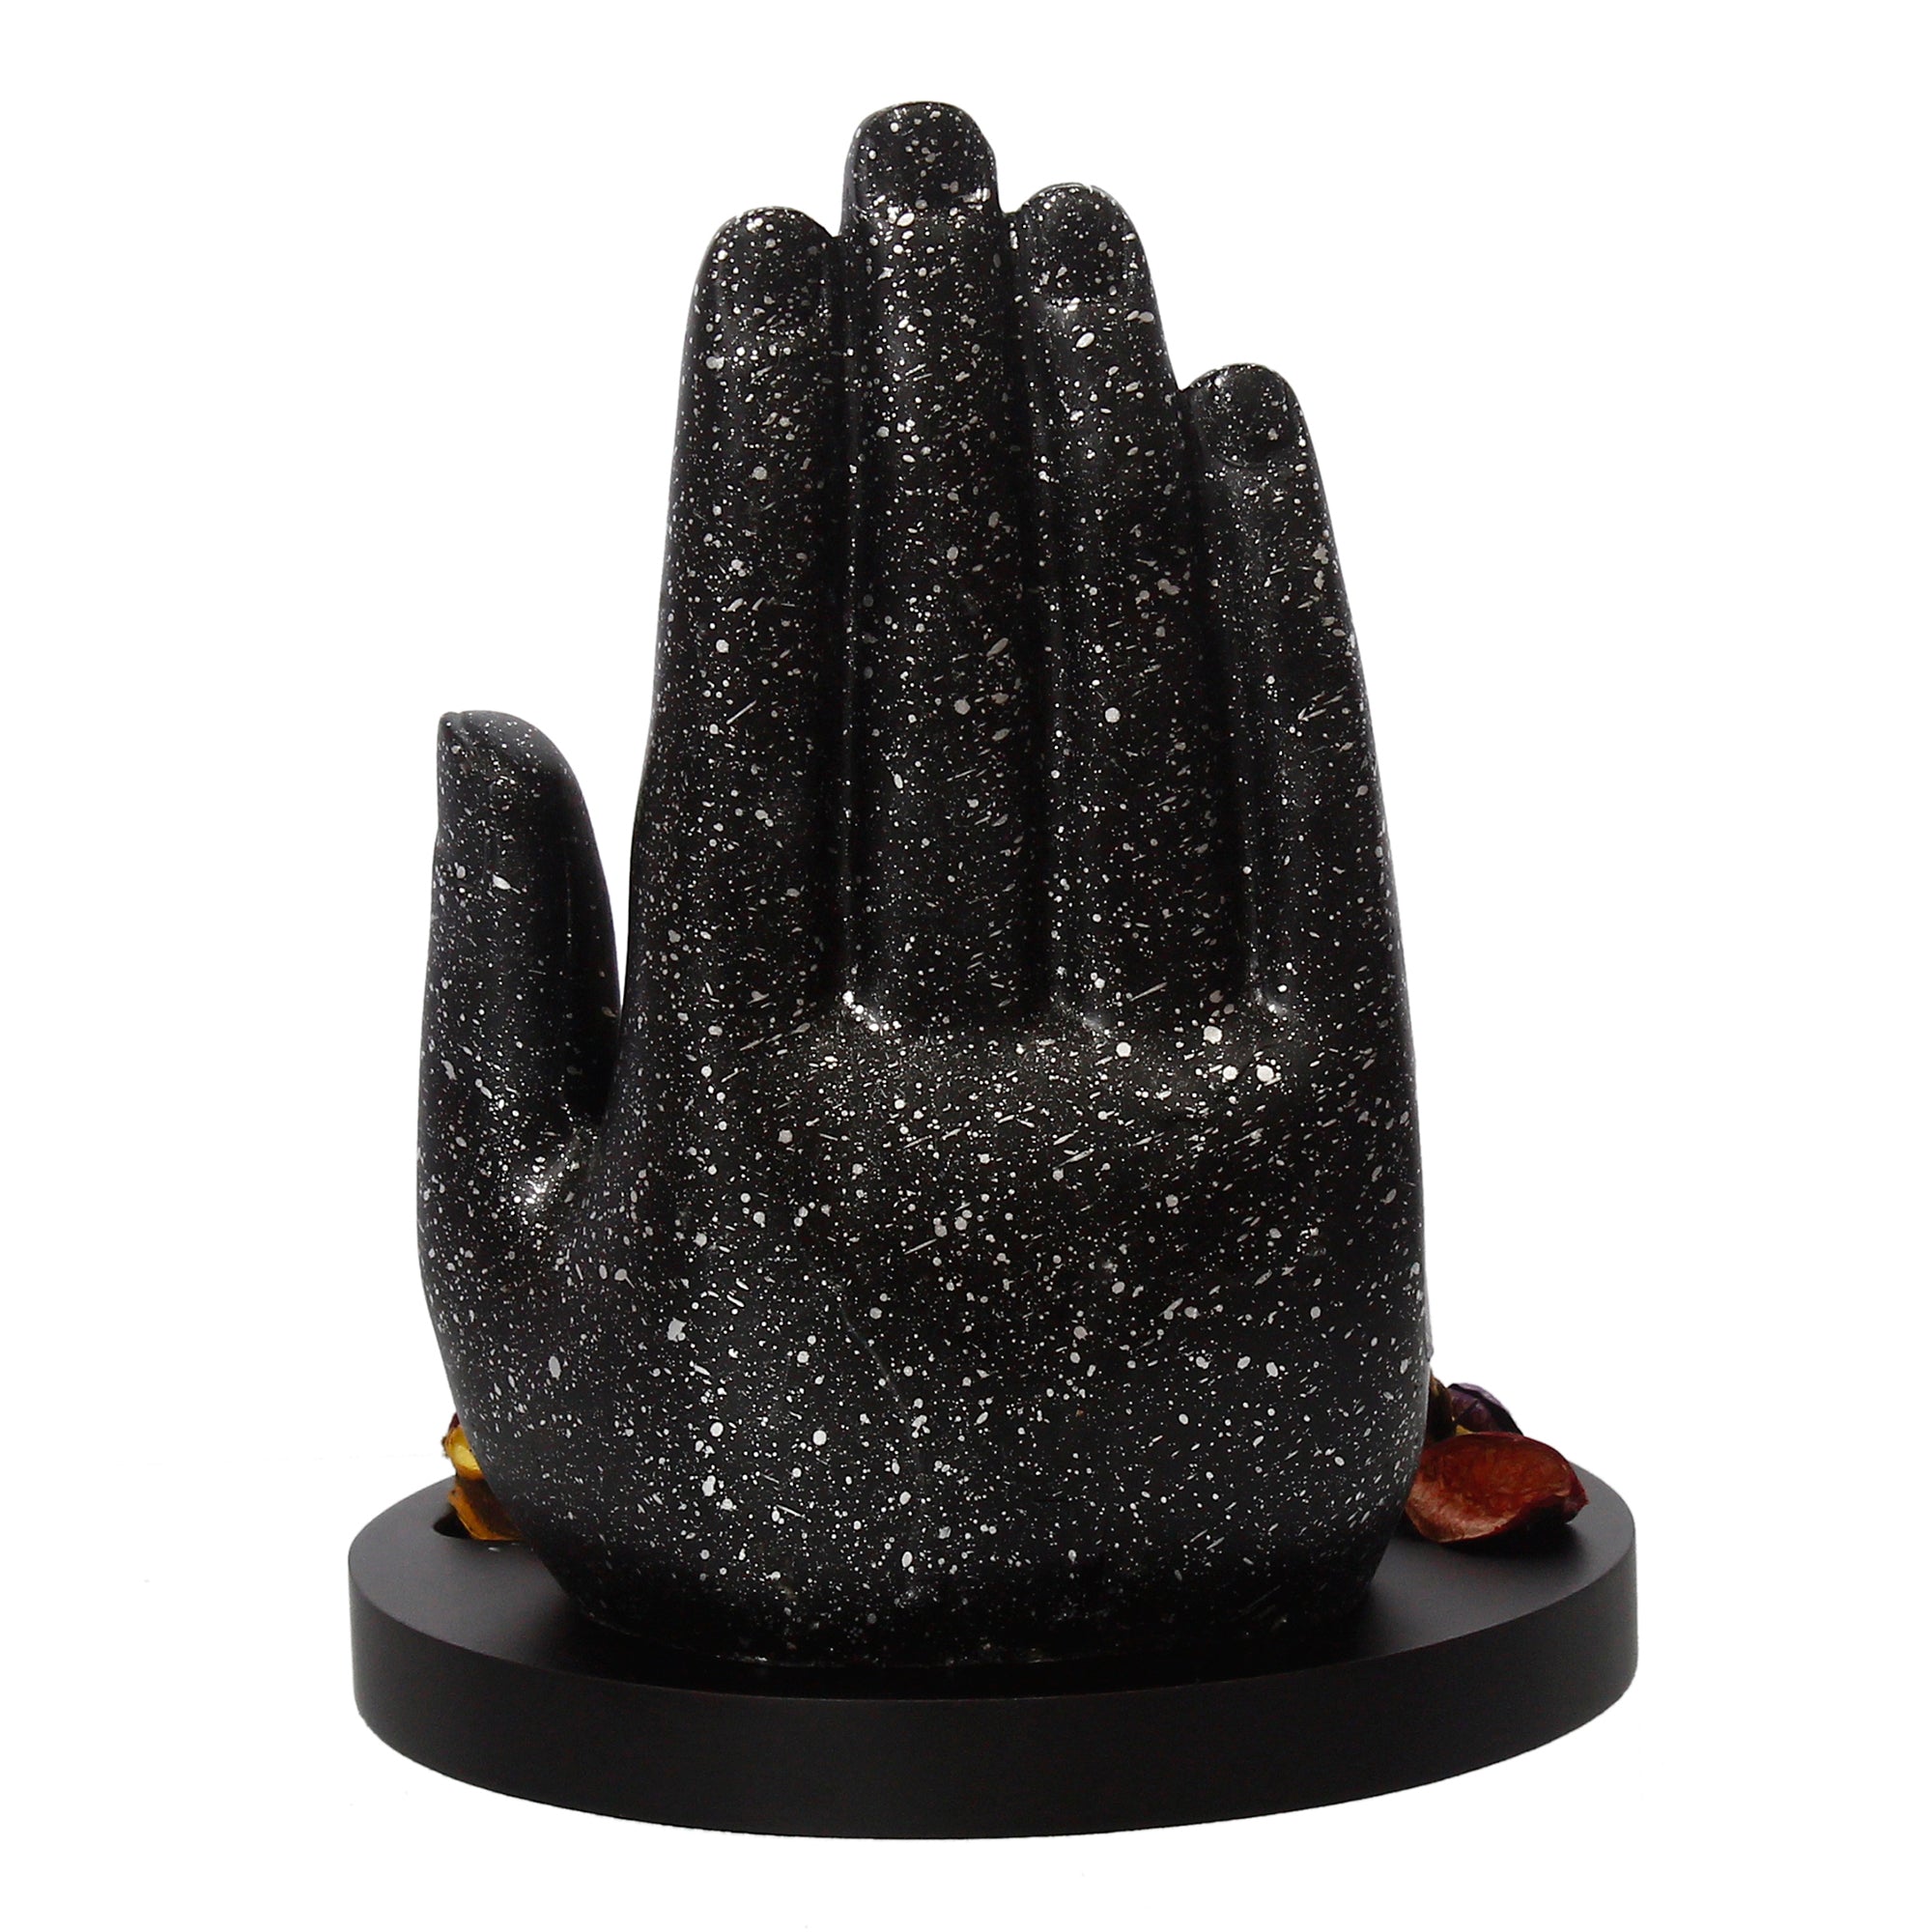 Polyresin Black and Golden Handcrafted Palm Buddha Statue with Wooden Base, Fragranced Petals and Tealight 6